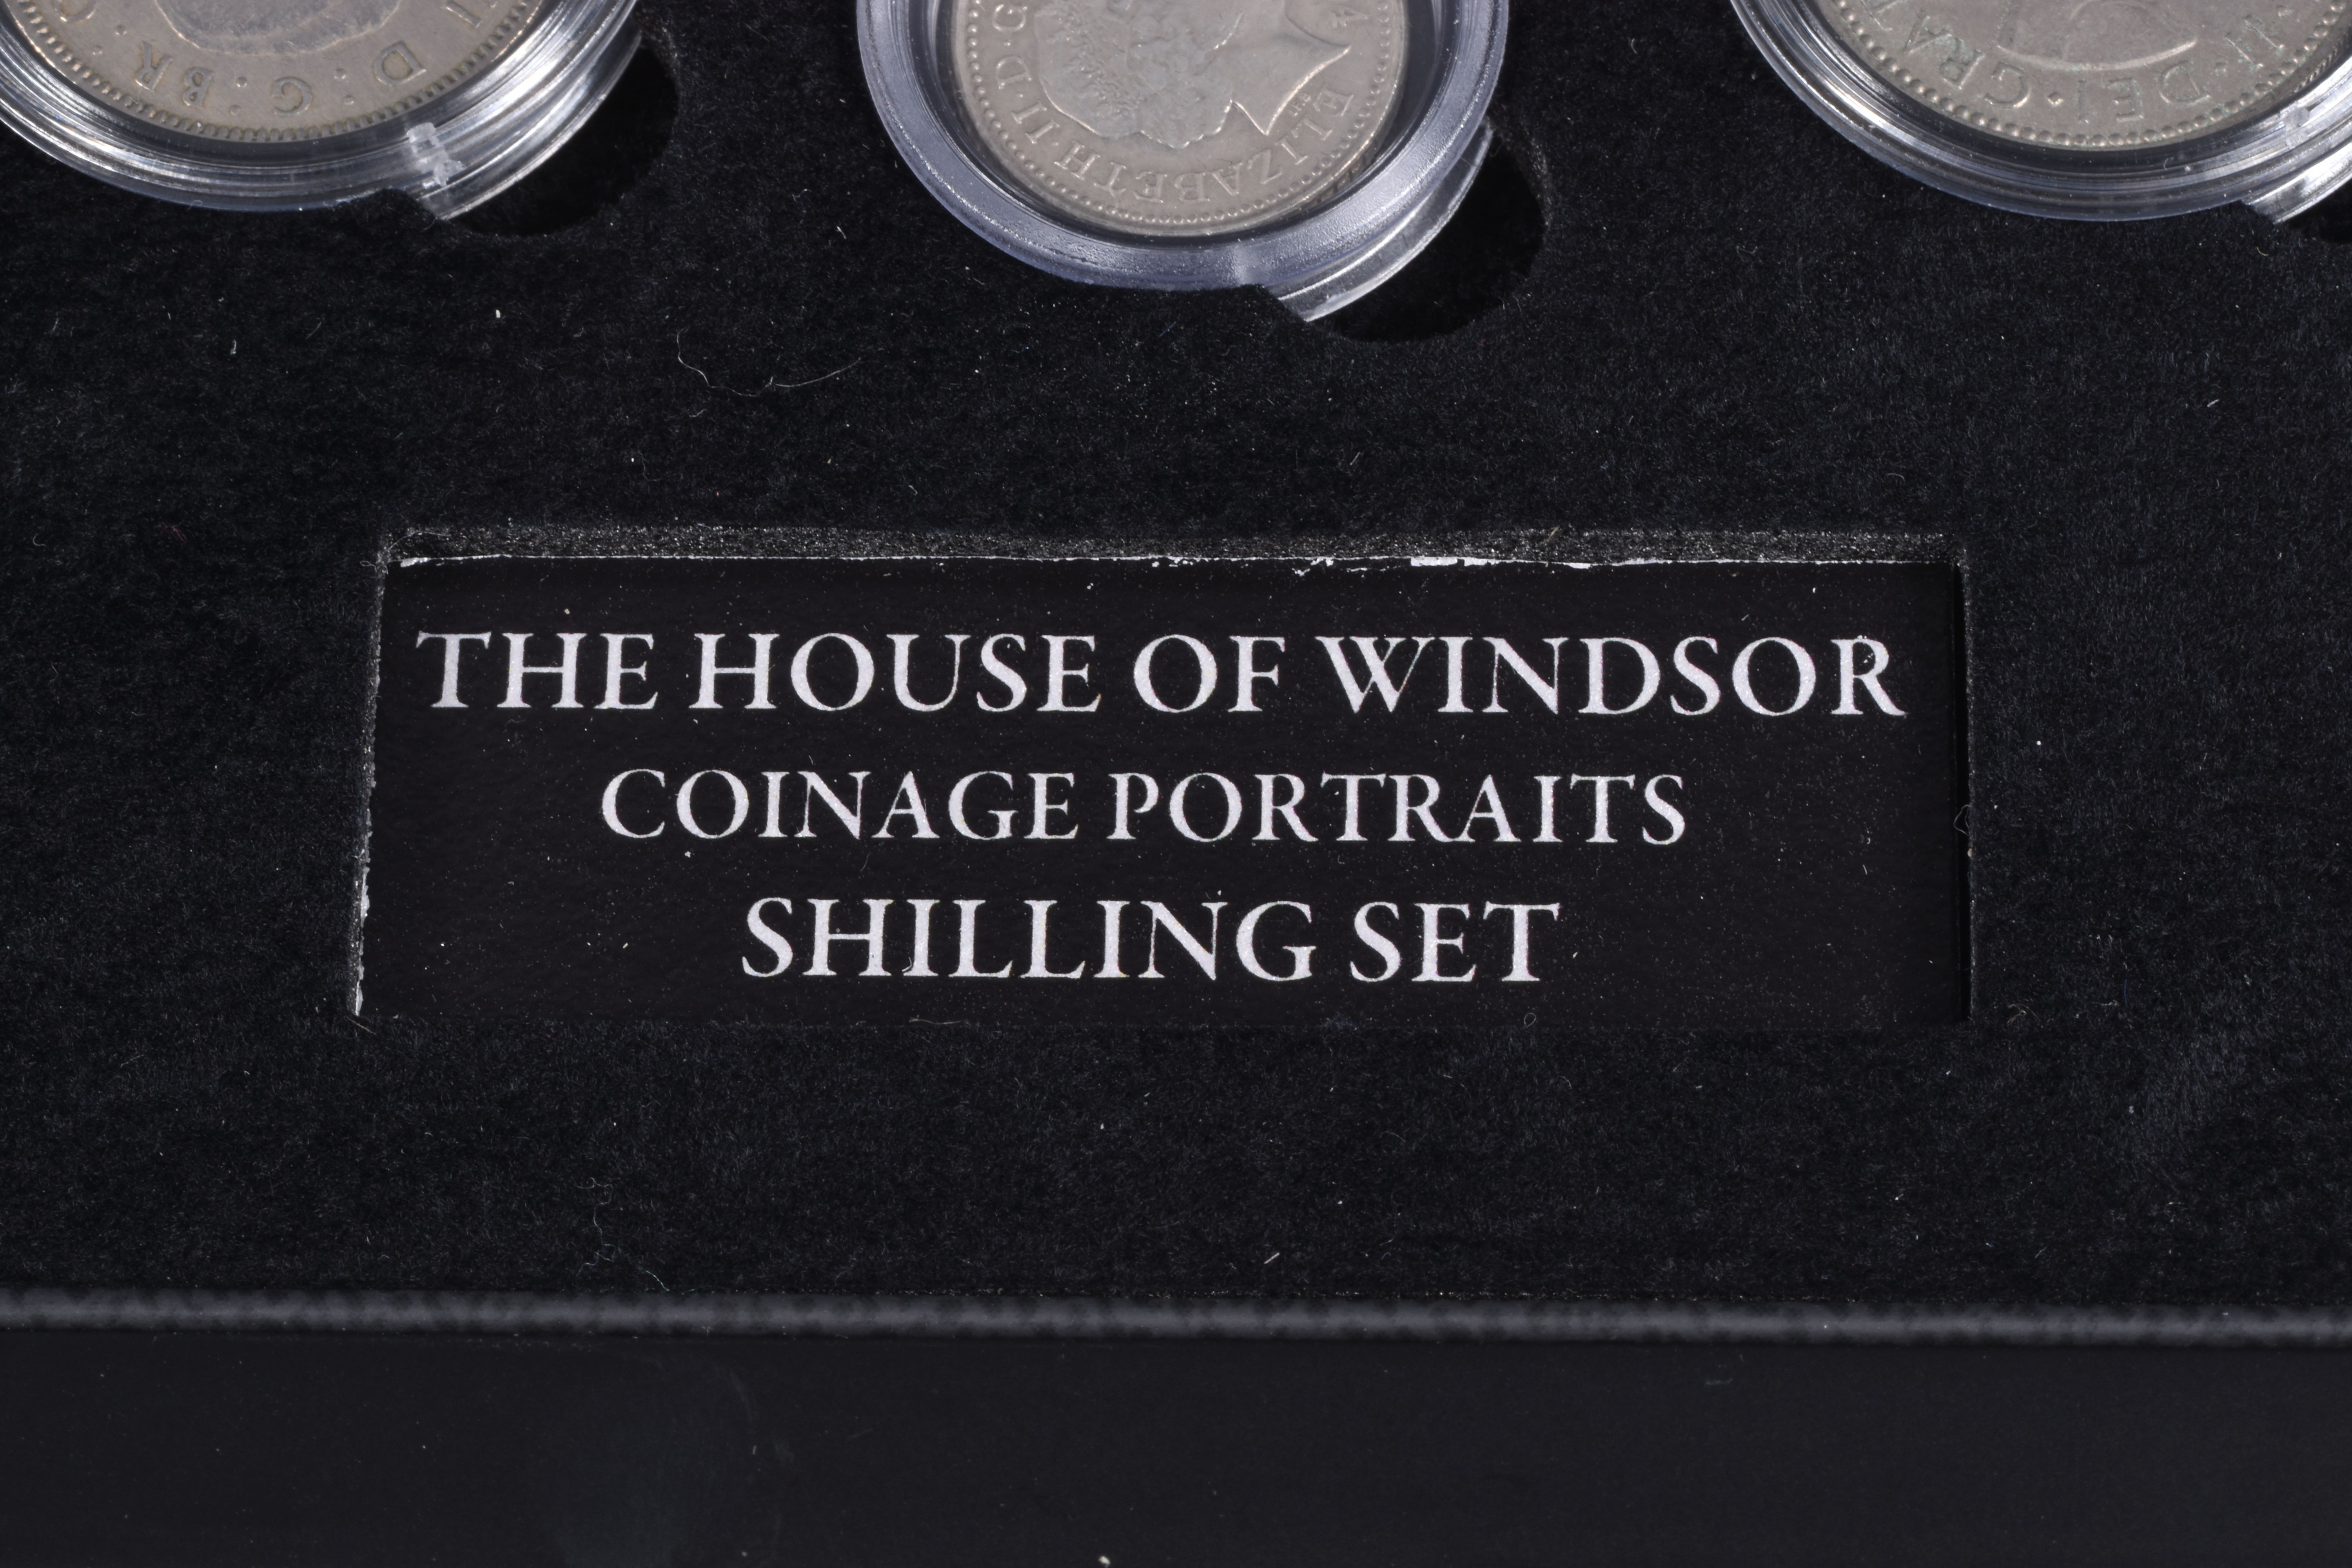 A CASED SET OF COMMEMORATIVE COINS, The House of Windsor coinage portraits shilling set by The - Image 2 of 9